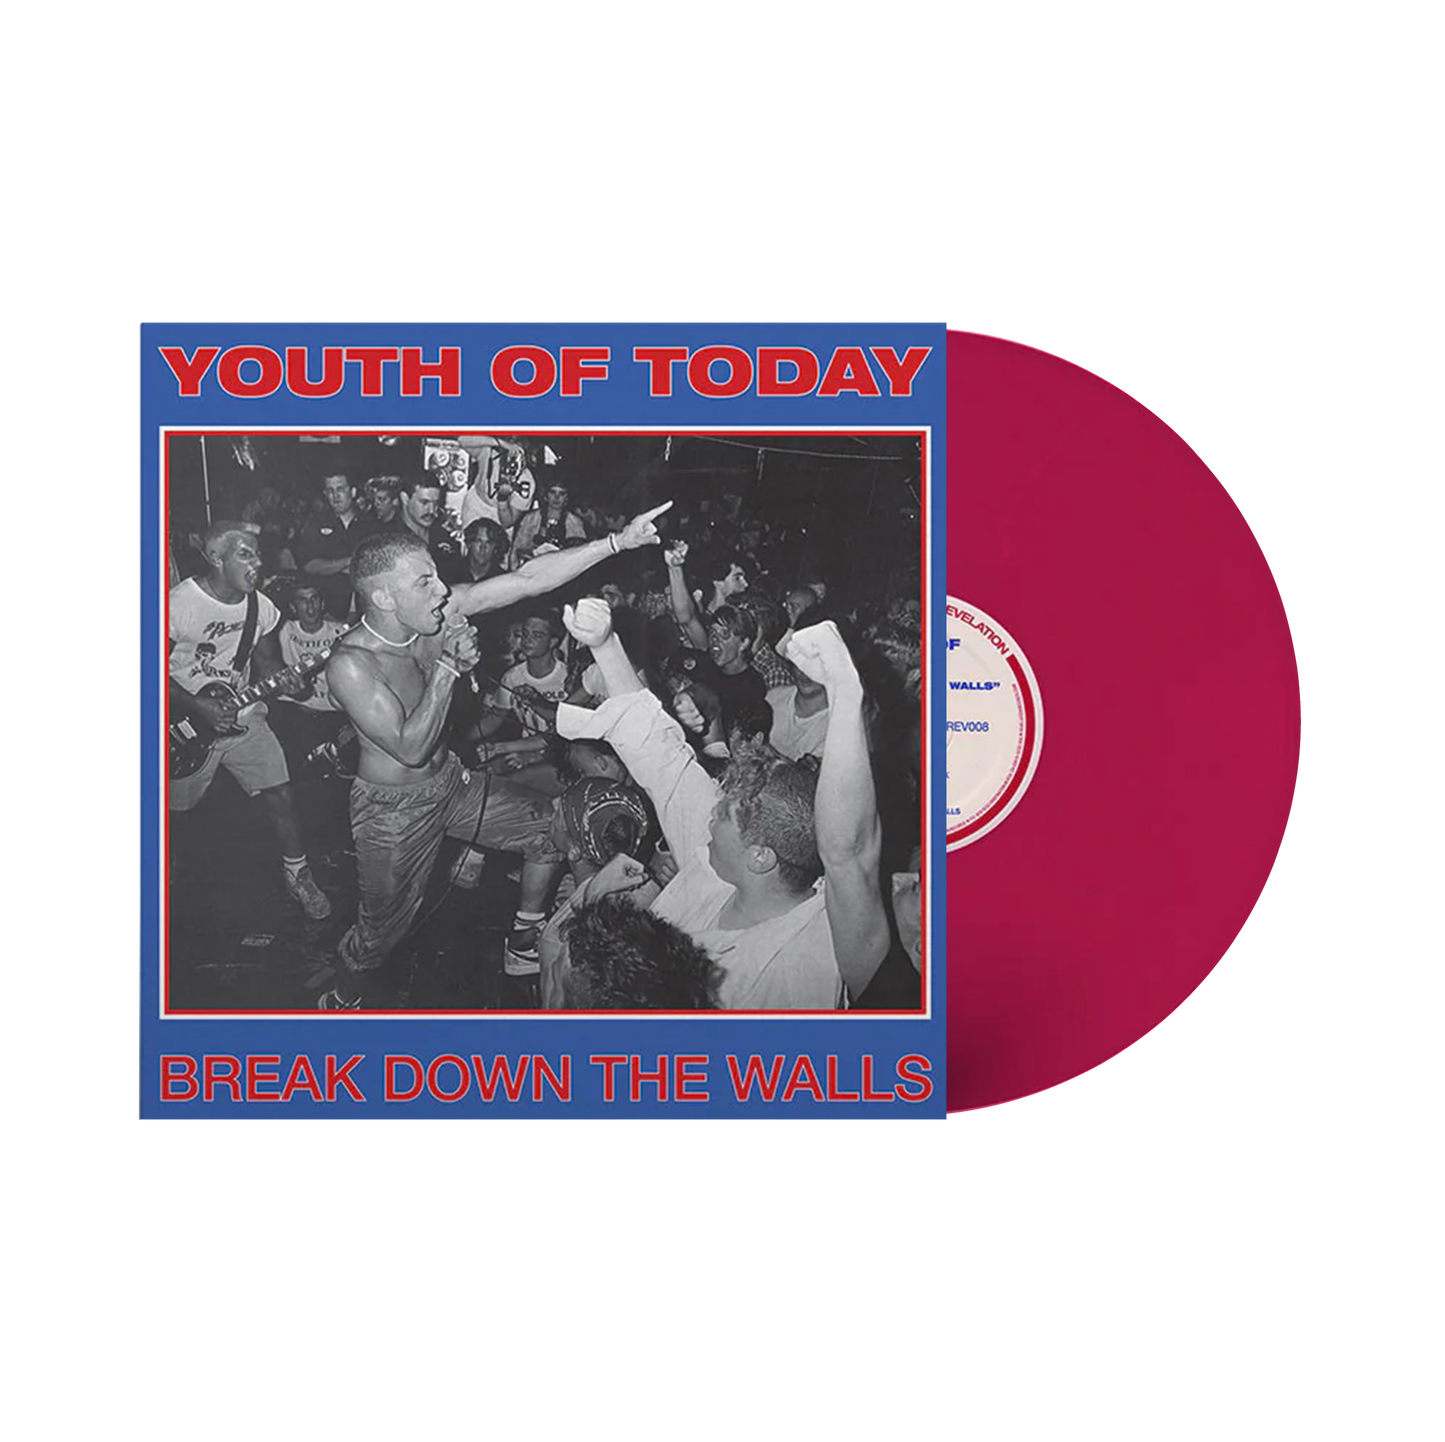 Youth Of Today "Break Down The Walls" LP